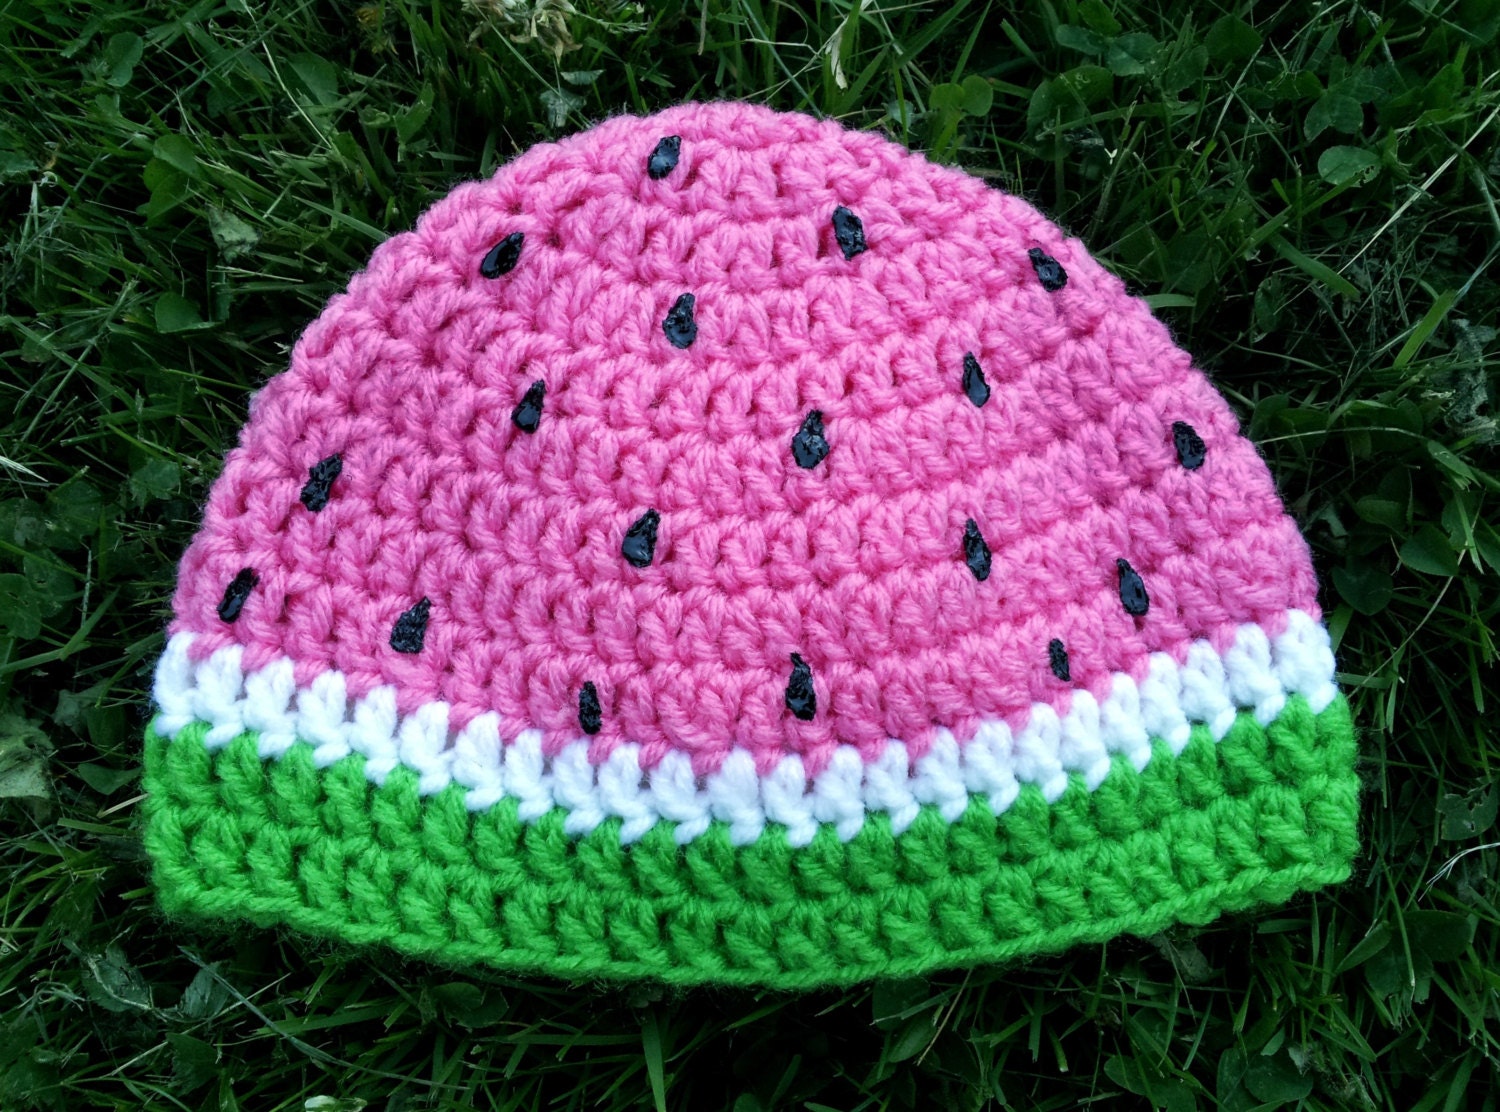 Baby or Toddler-Sized Crochet Watermelon Beanie Hat